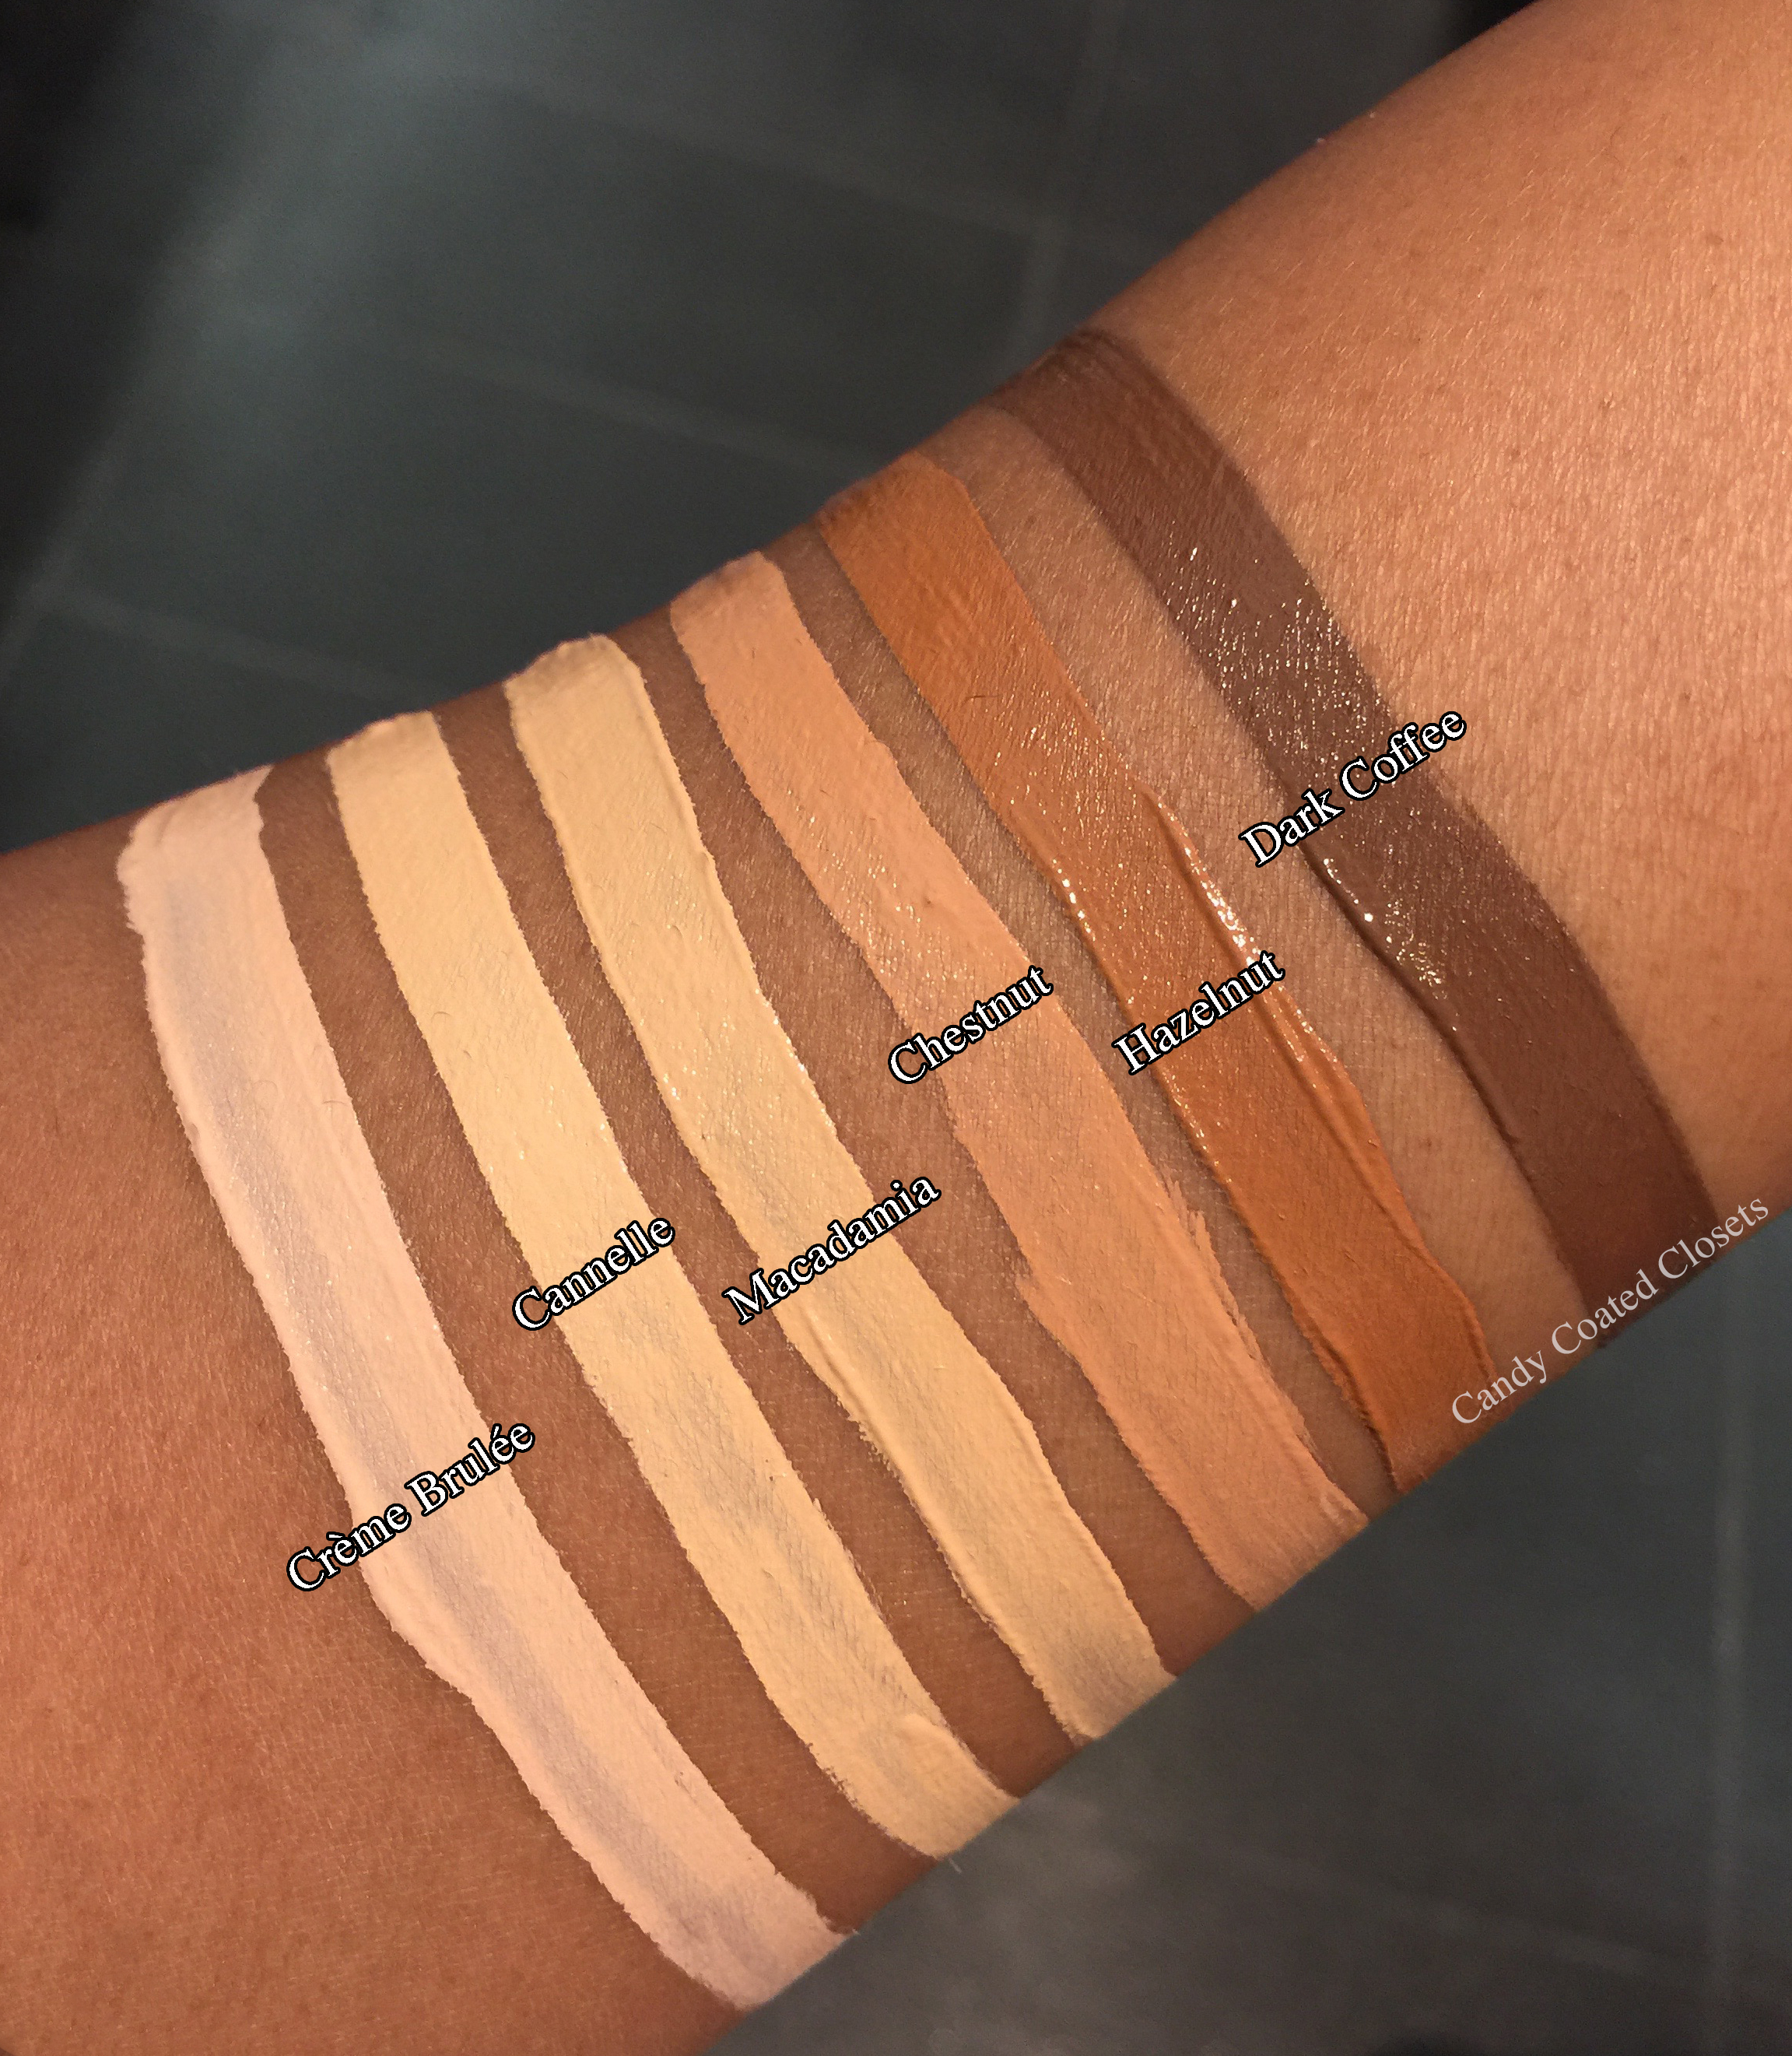 NARS Radiant Creamy Concealer Review, Swatches & Photos – Crème Brulée, Cannelle, Macadamia, Chestnut, Amande, Cafe, Cacao & Dark Coffee — Candy Coated Closets